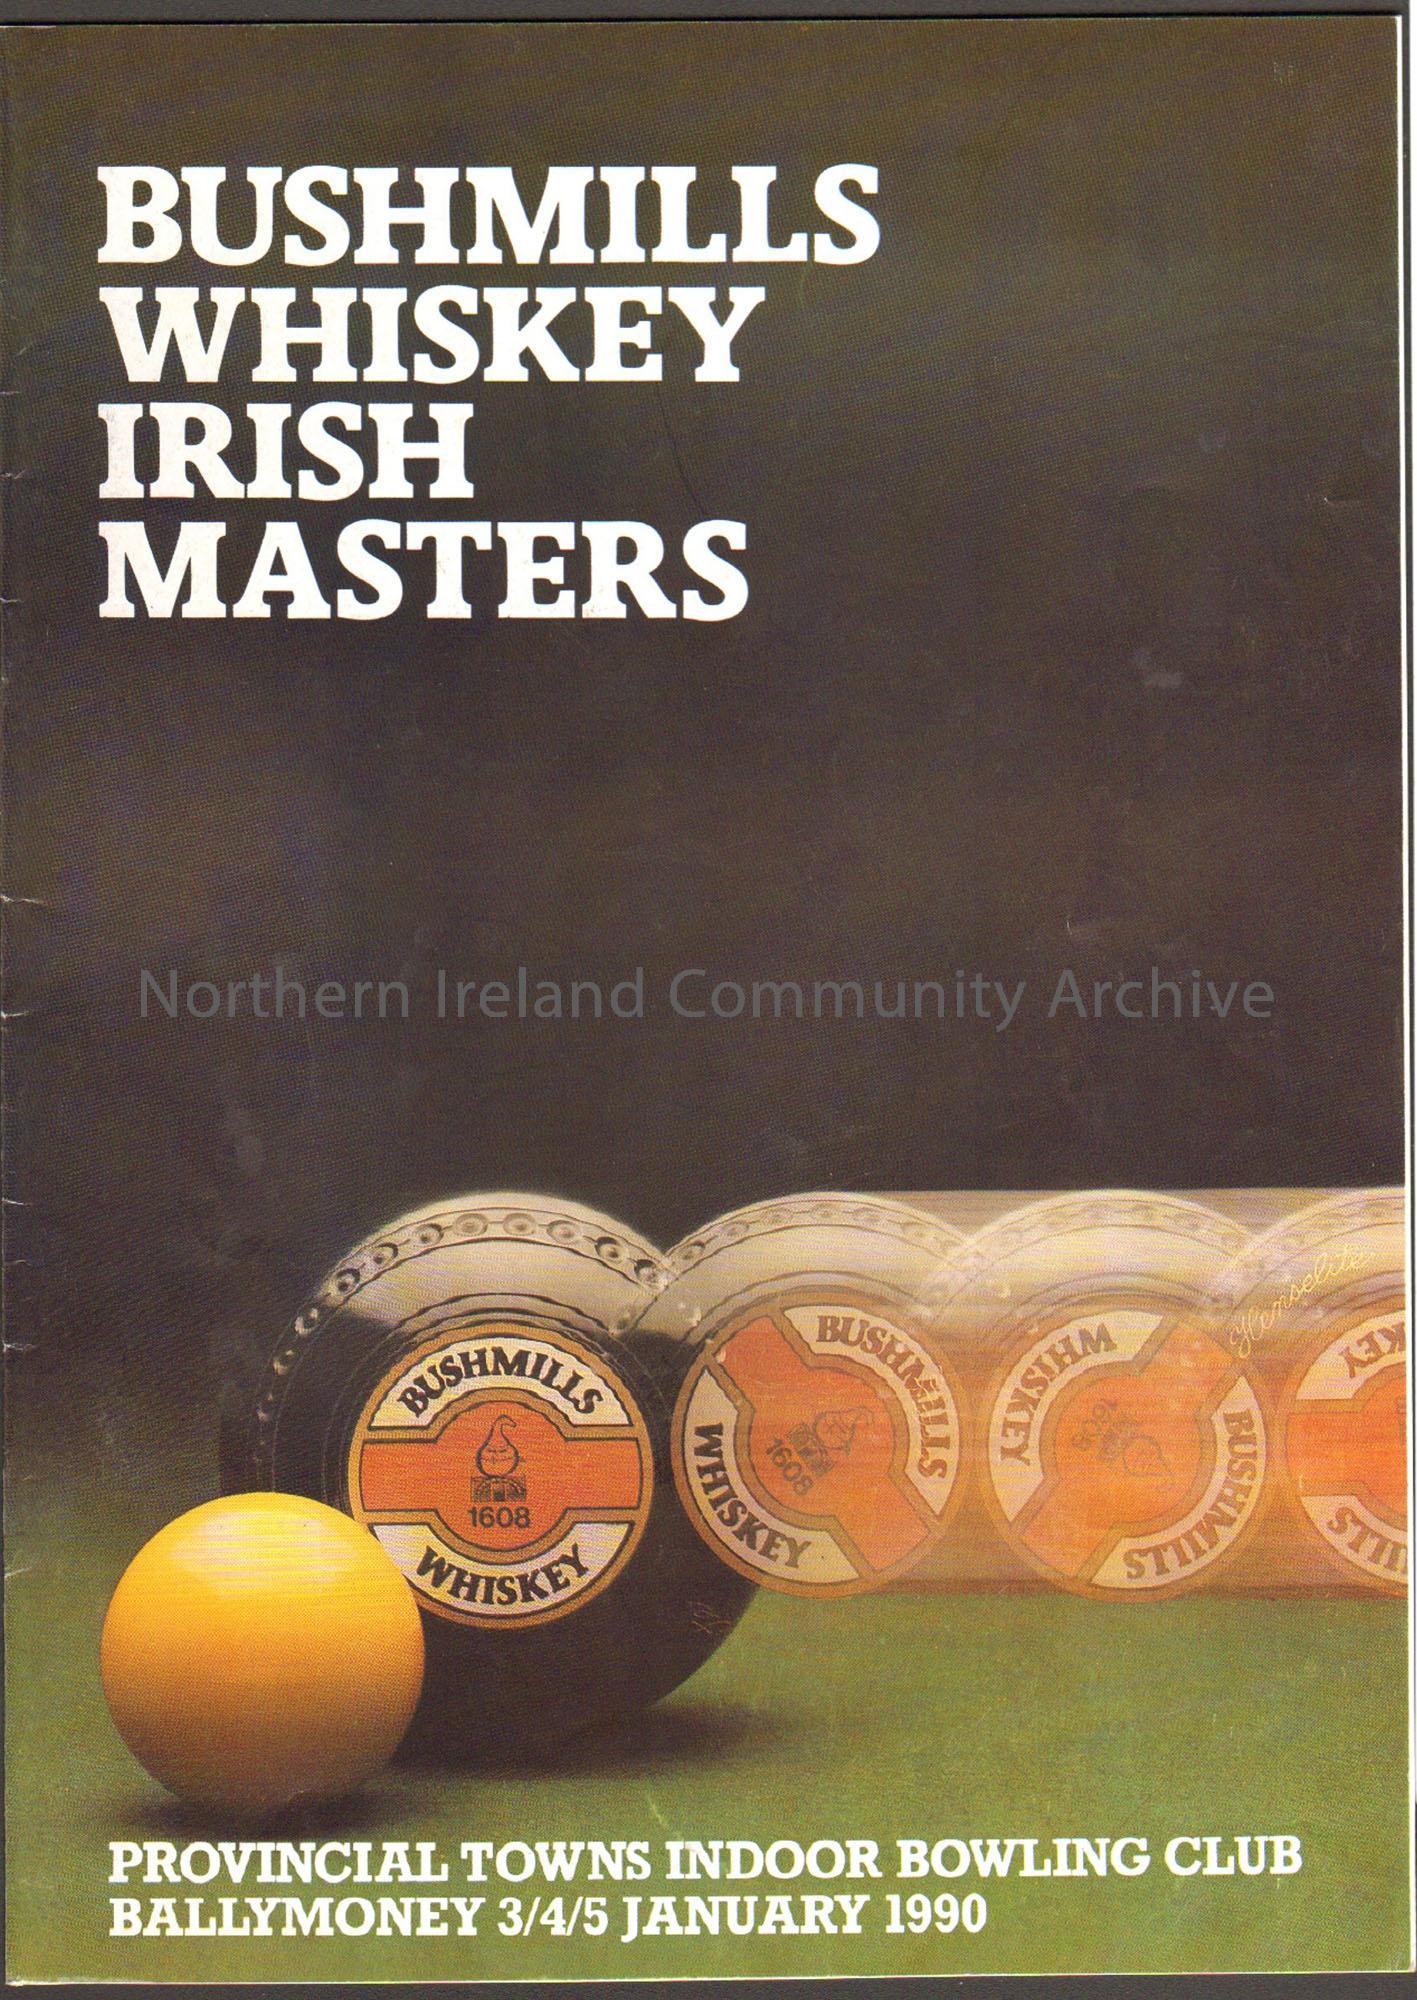 Bushmills Whiskey Irish Masters, Provincial Towns Indoor Bowling Club, Ballymoney January 1990. Black cover with a bowl rolling and a yellow jack on a…